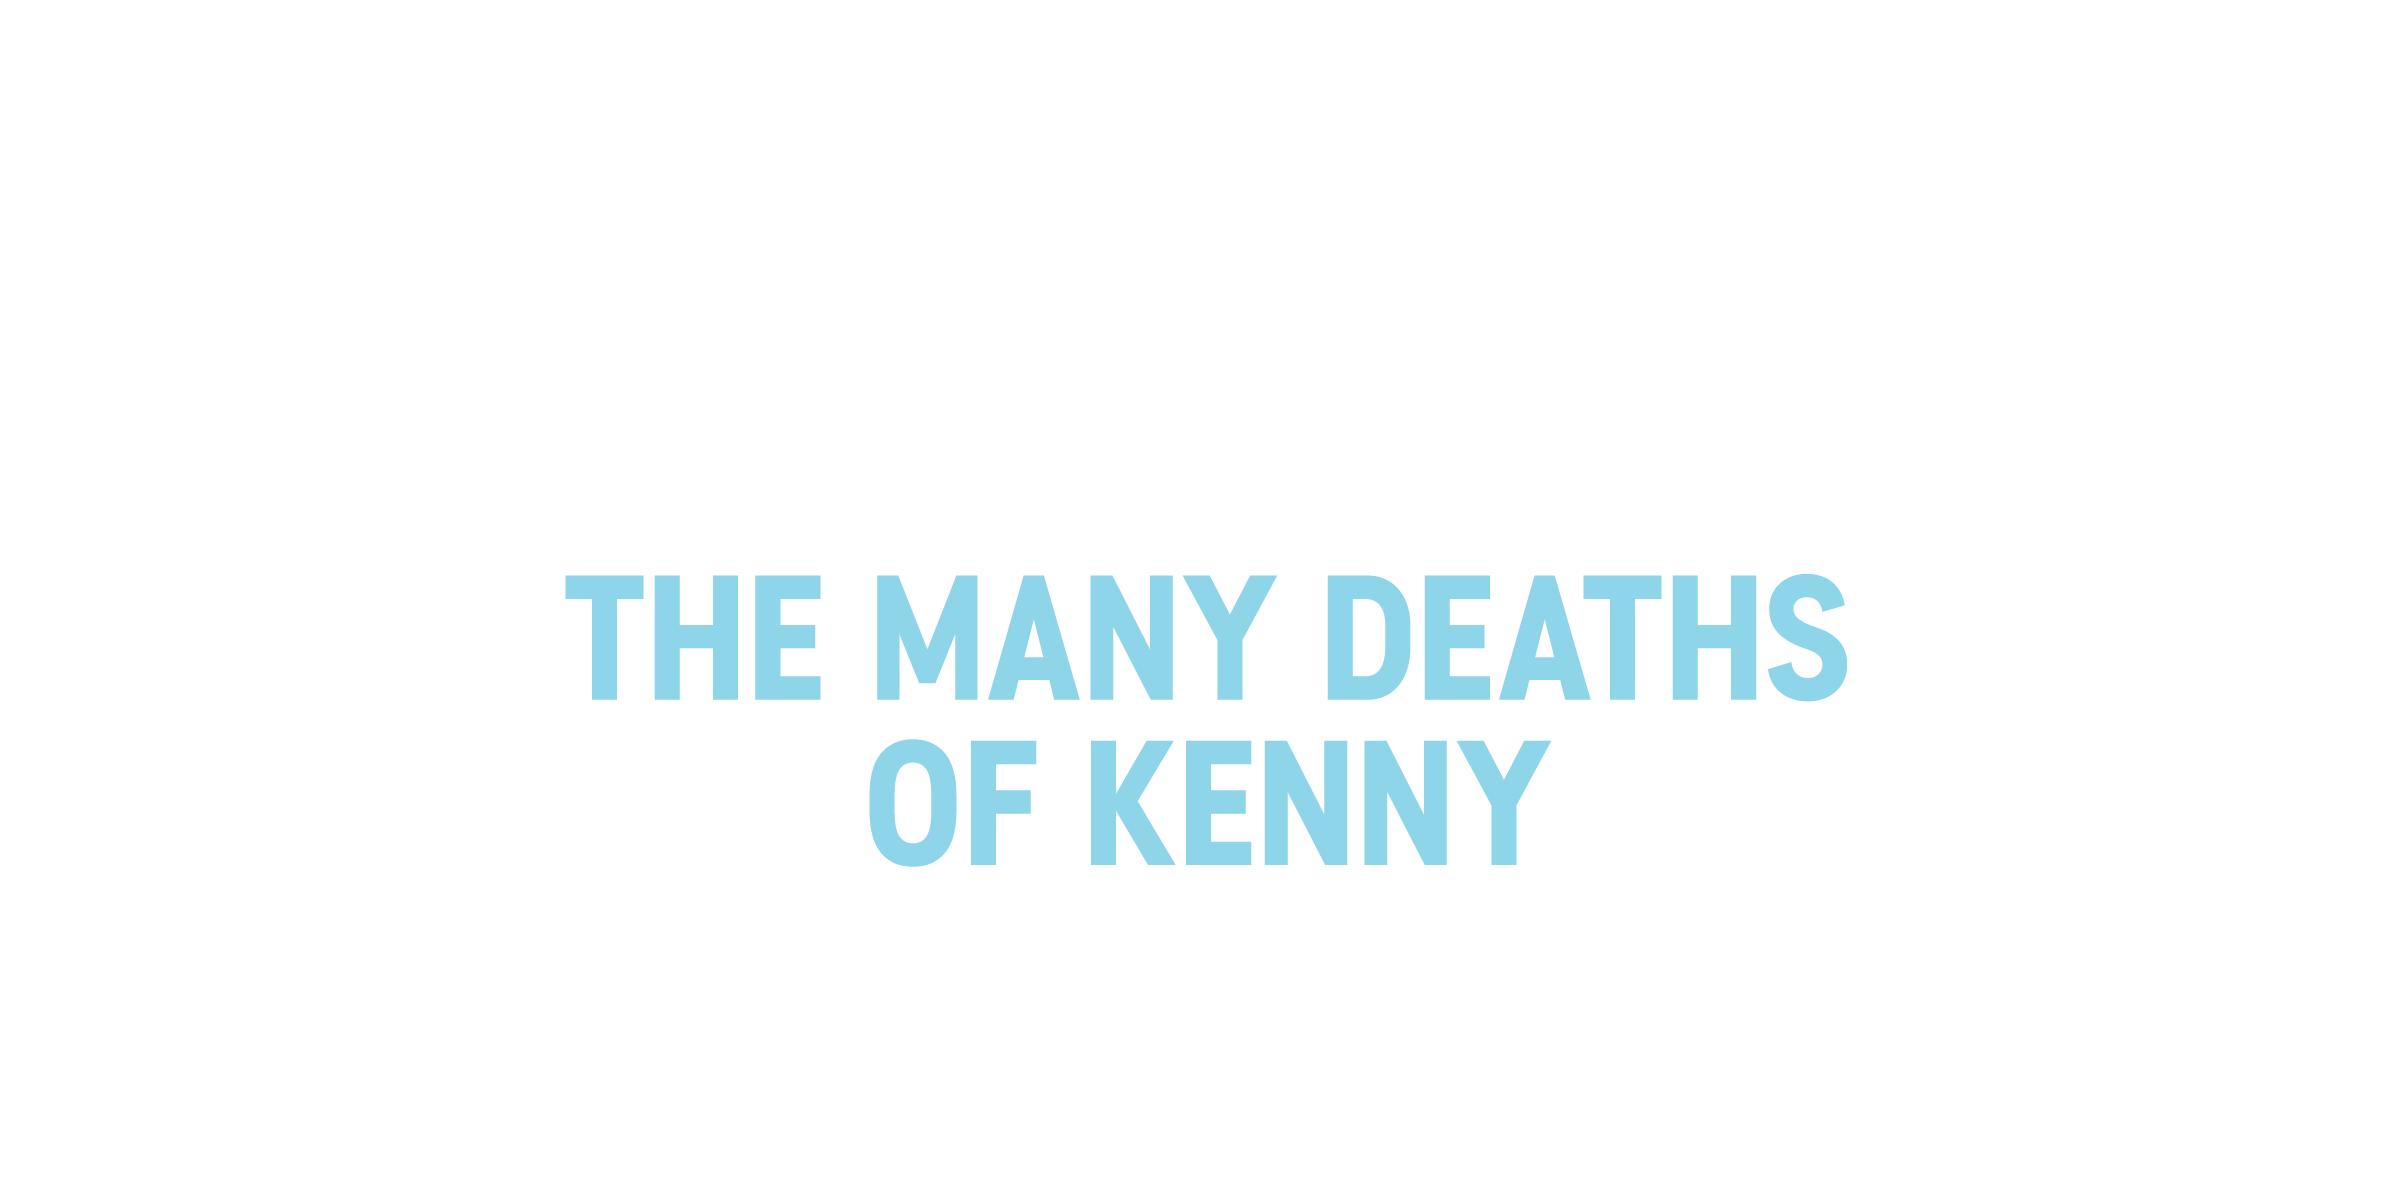 South Park: The Many Deaths of Kenny